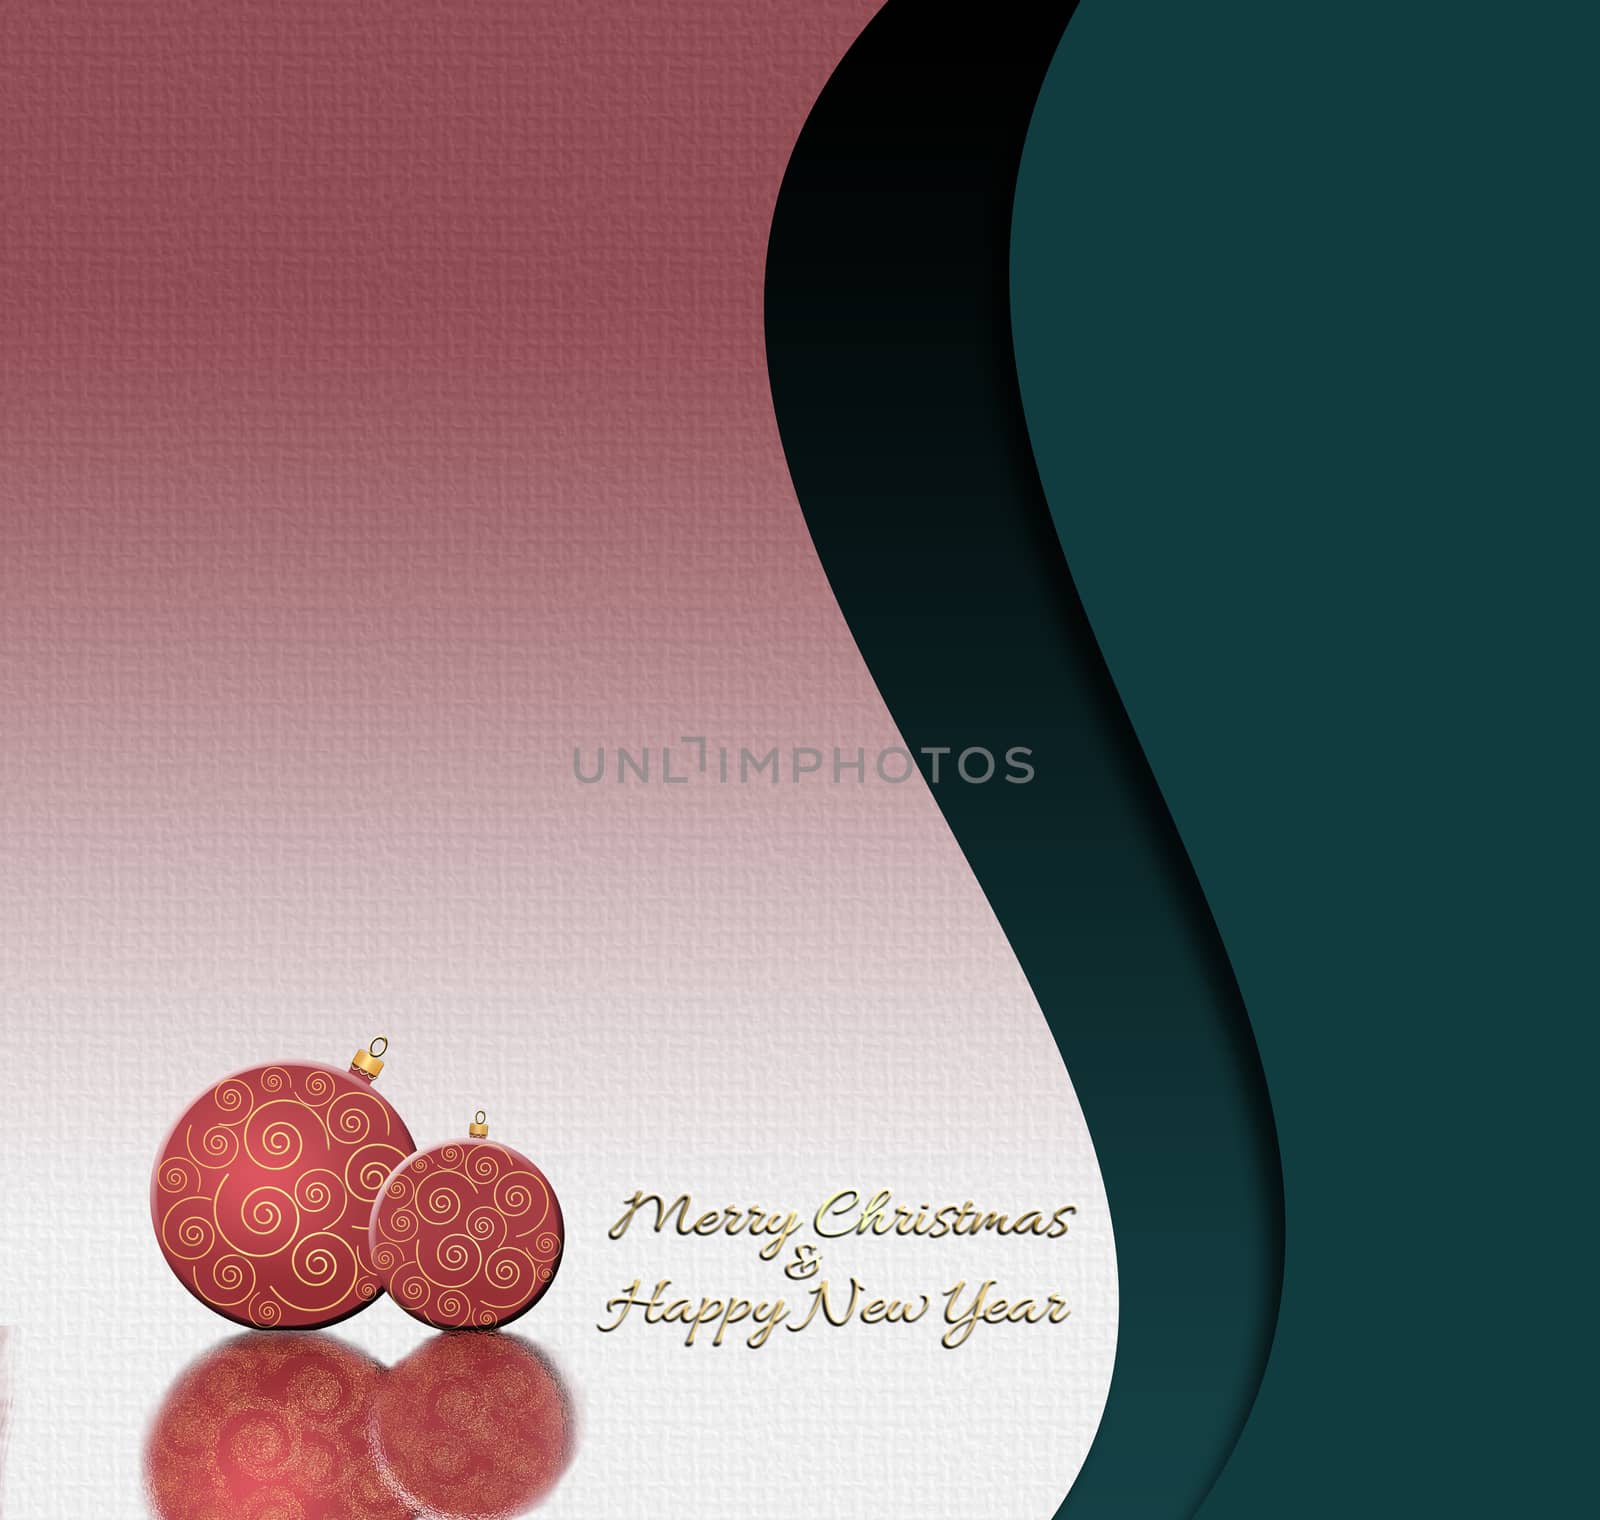 Elegant Christmas background with hanging balls in brown colour by NelliPolk